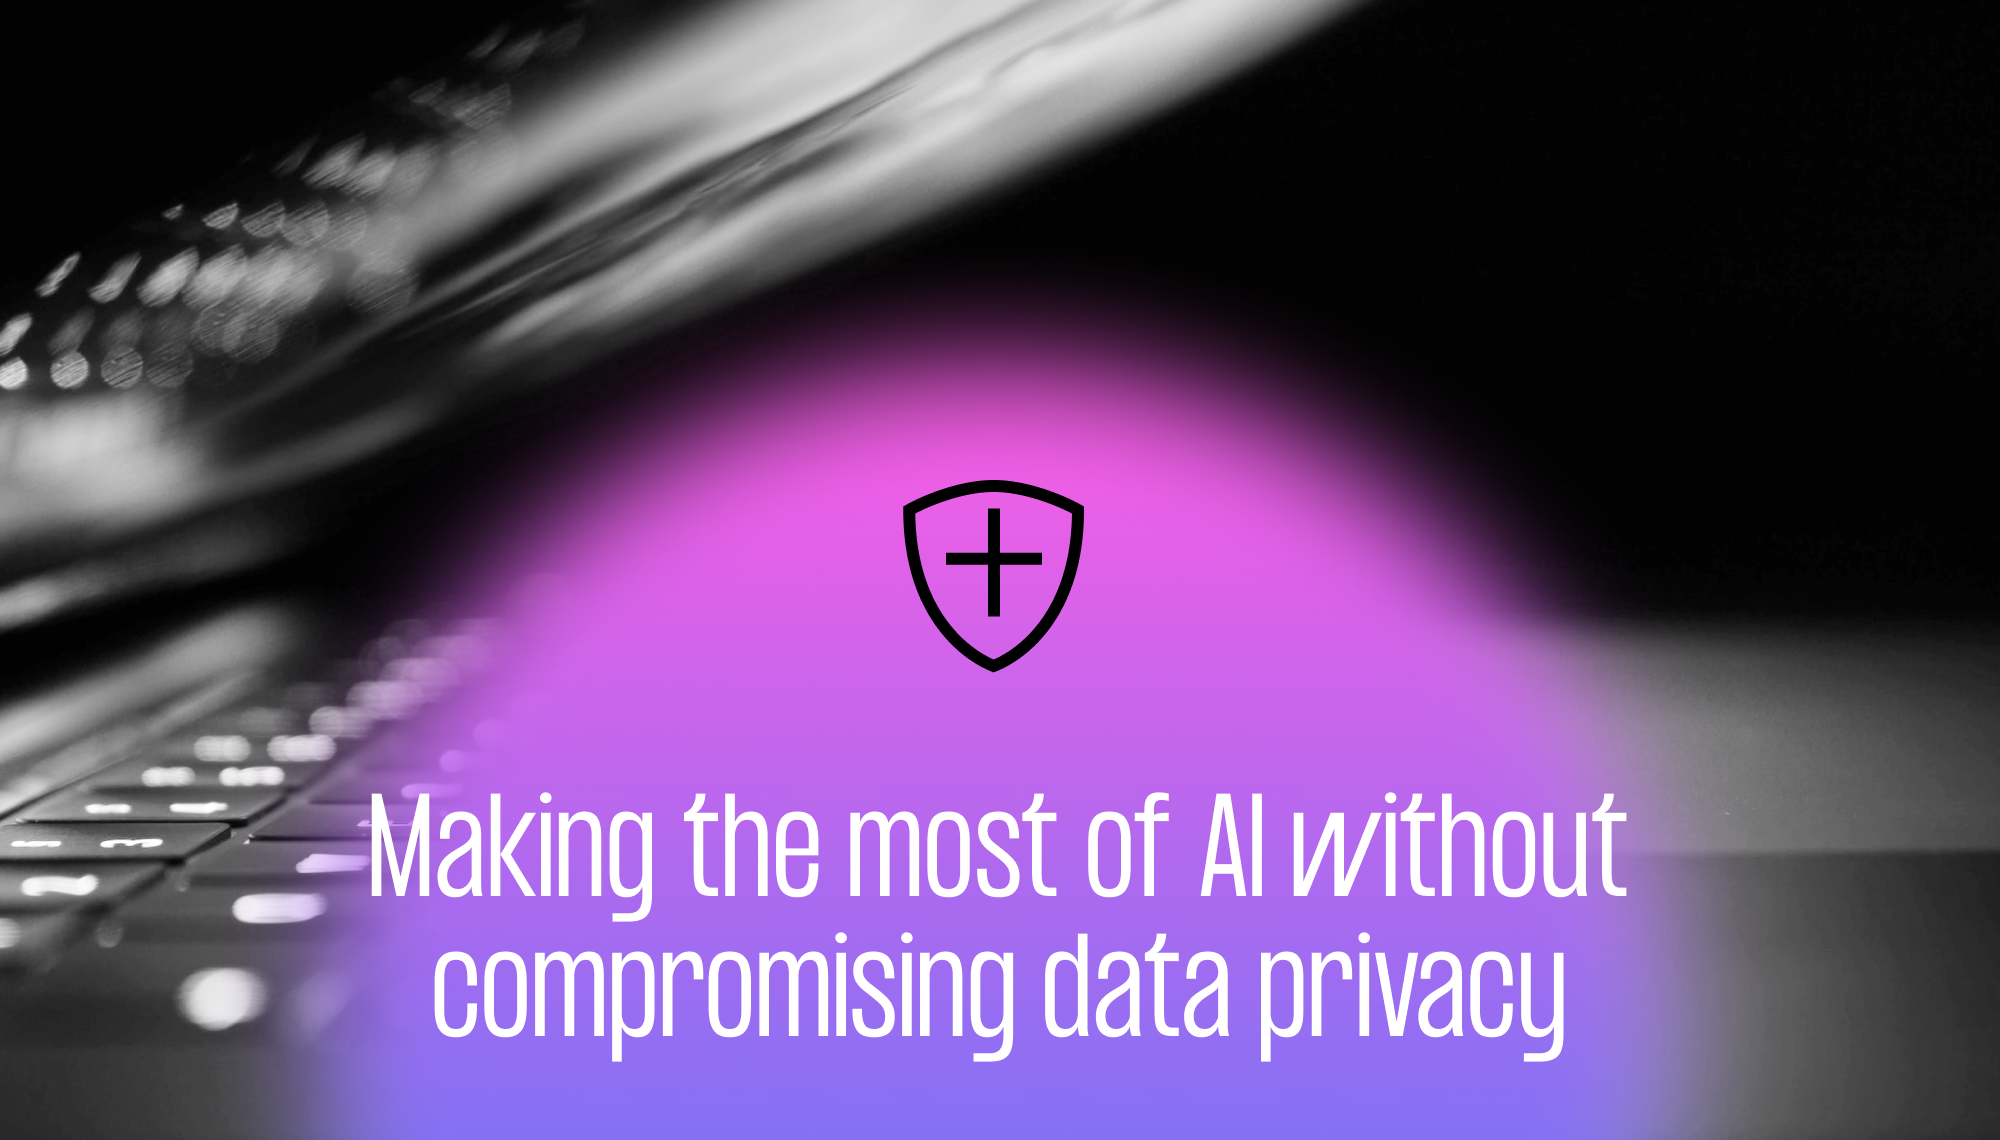 Making the most of AI without compromising data privacy